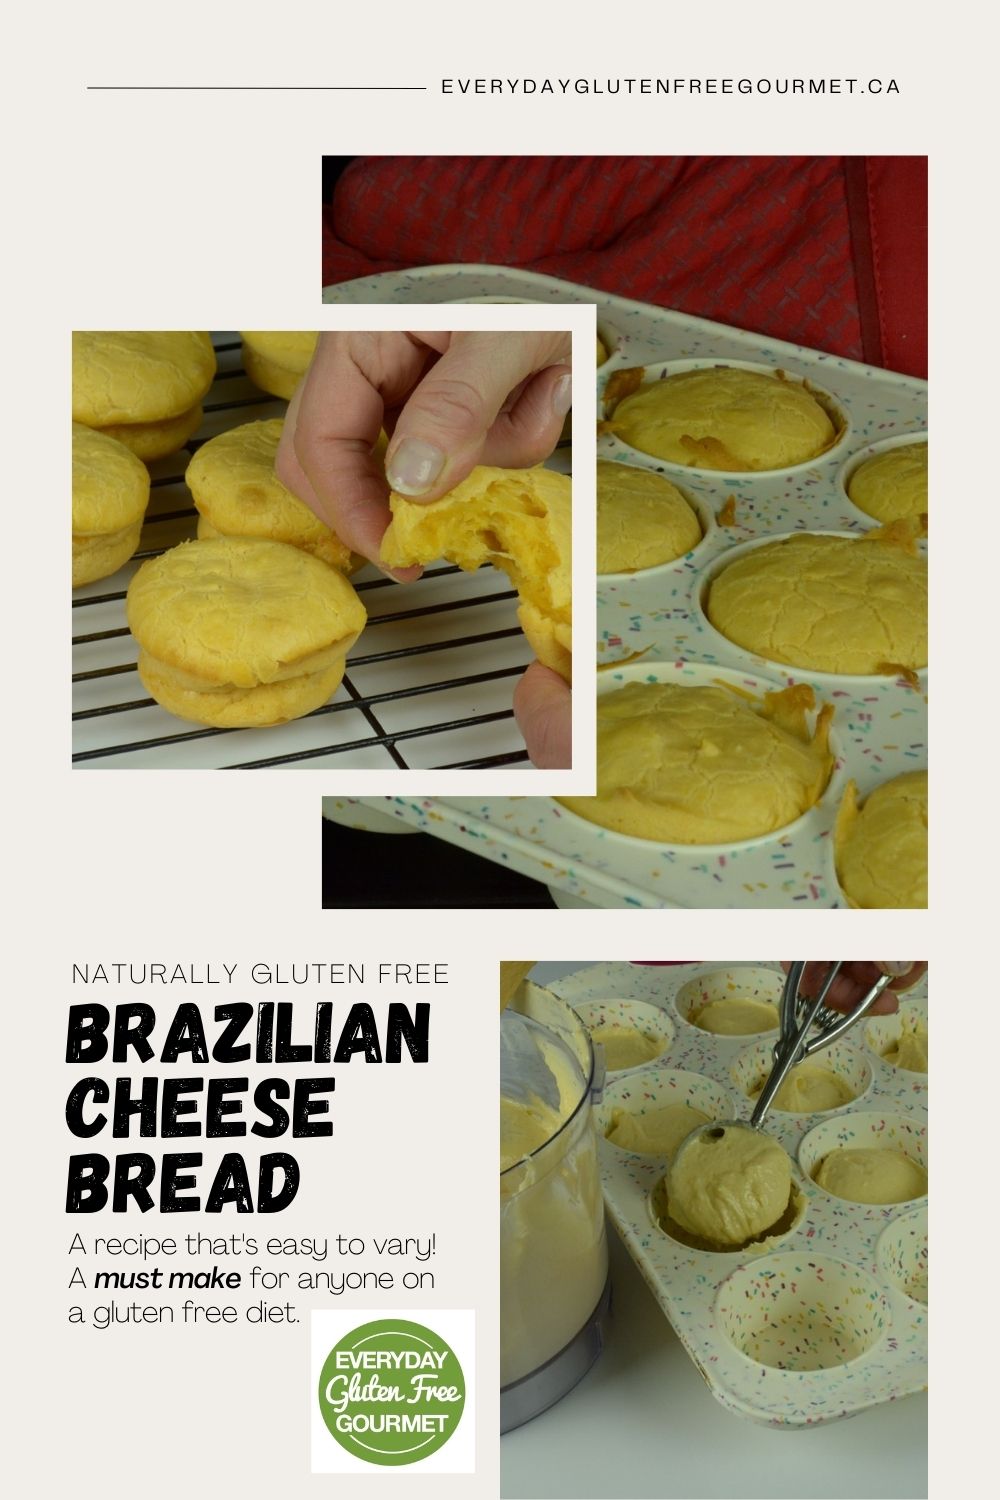 Brazilian Cheese Bread; batter being scooped into a muffin pan, the baked buns and someone pulling apart a cooked bun.